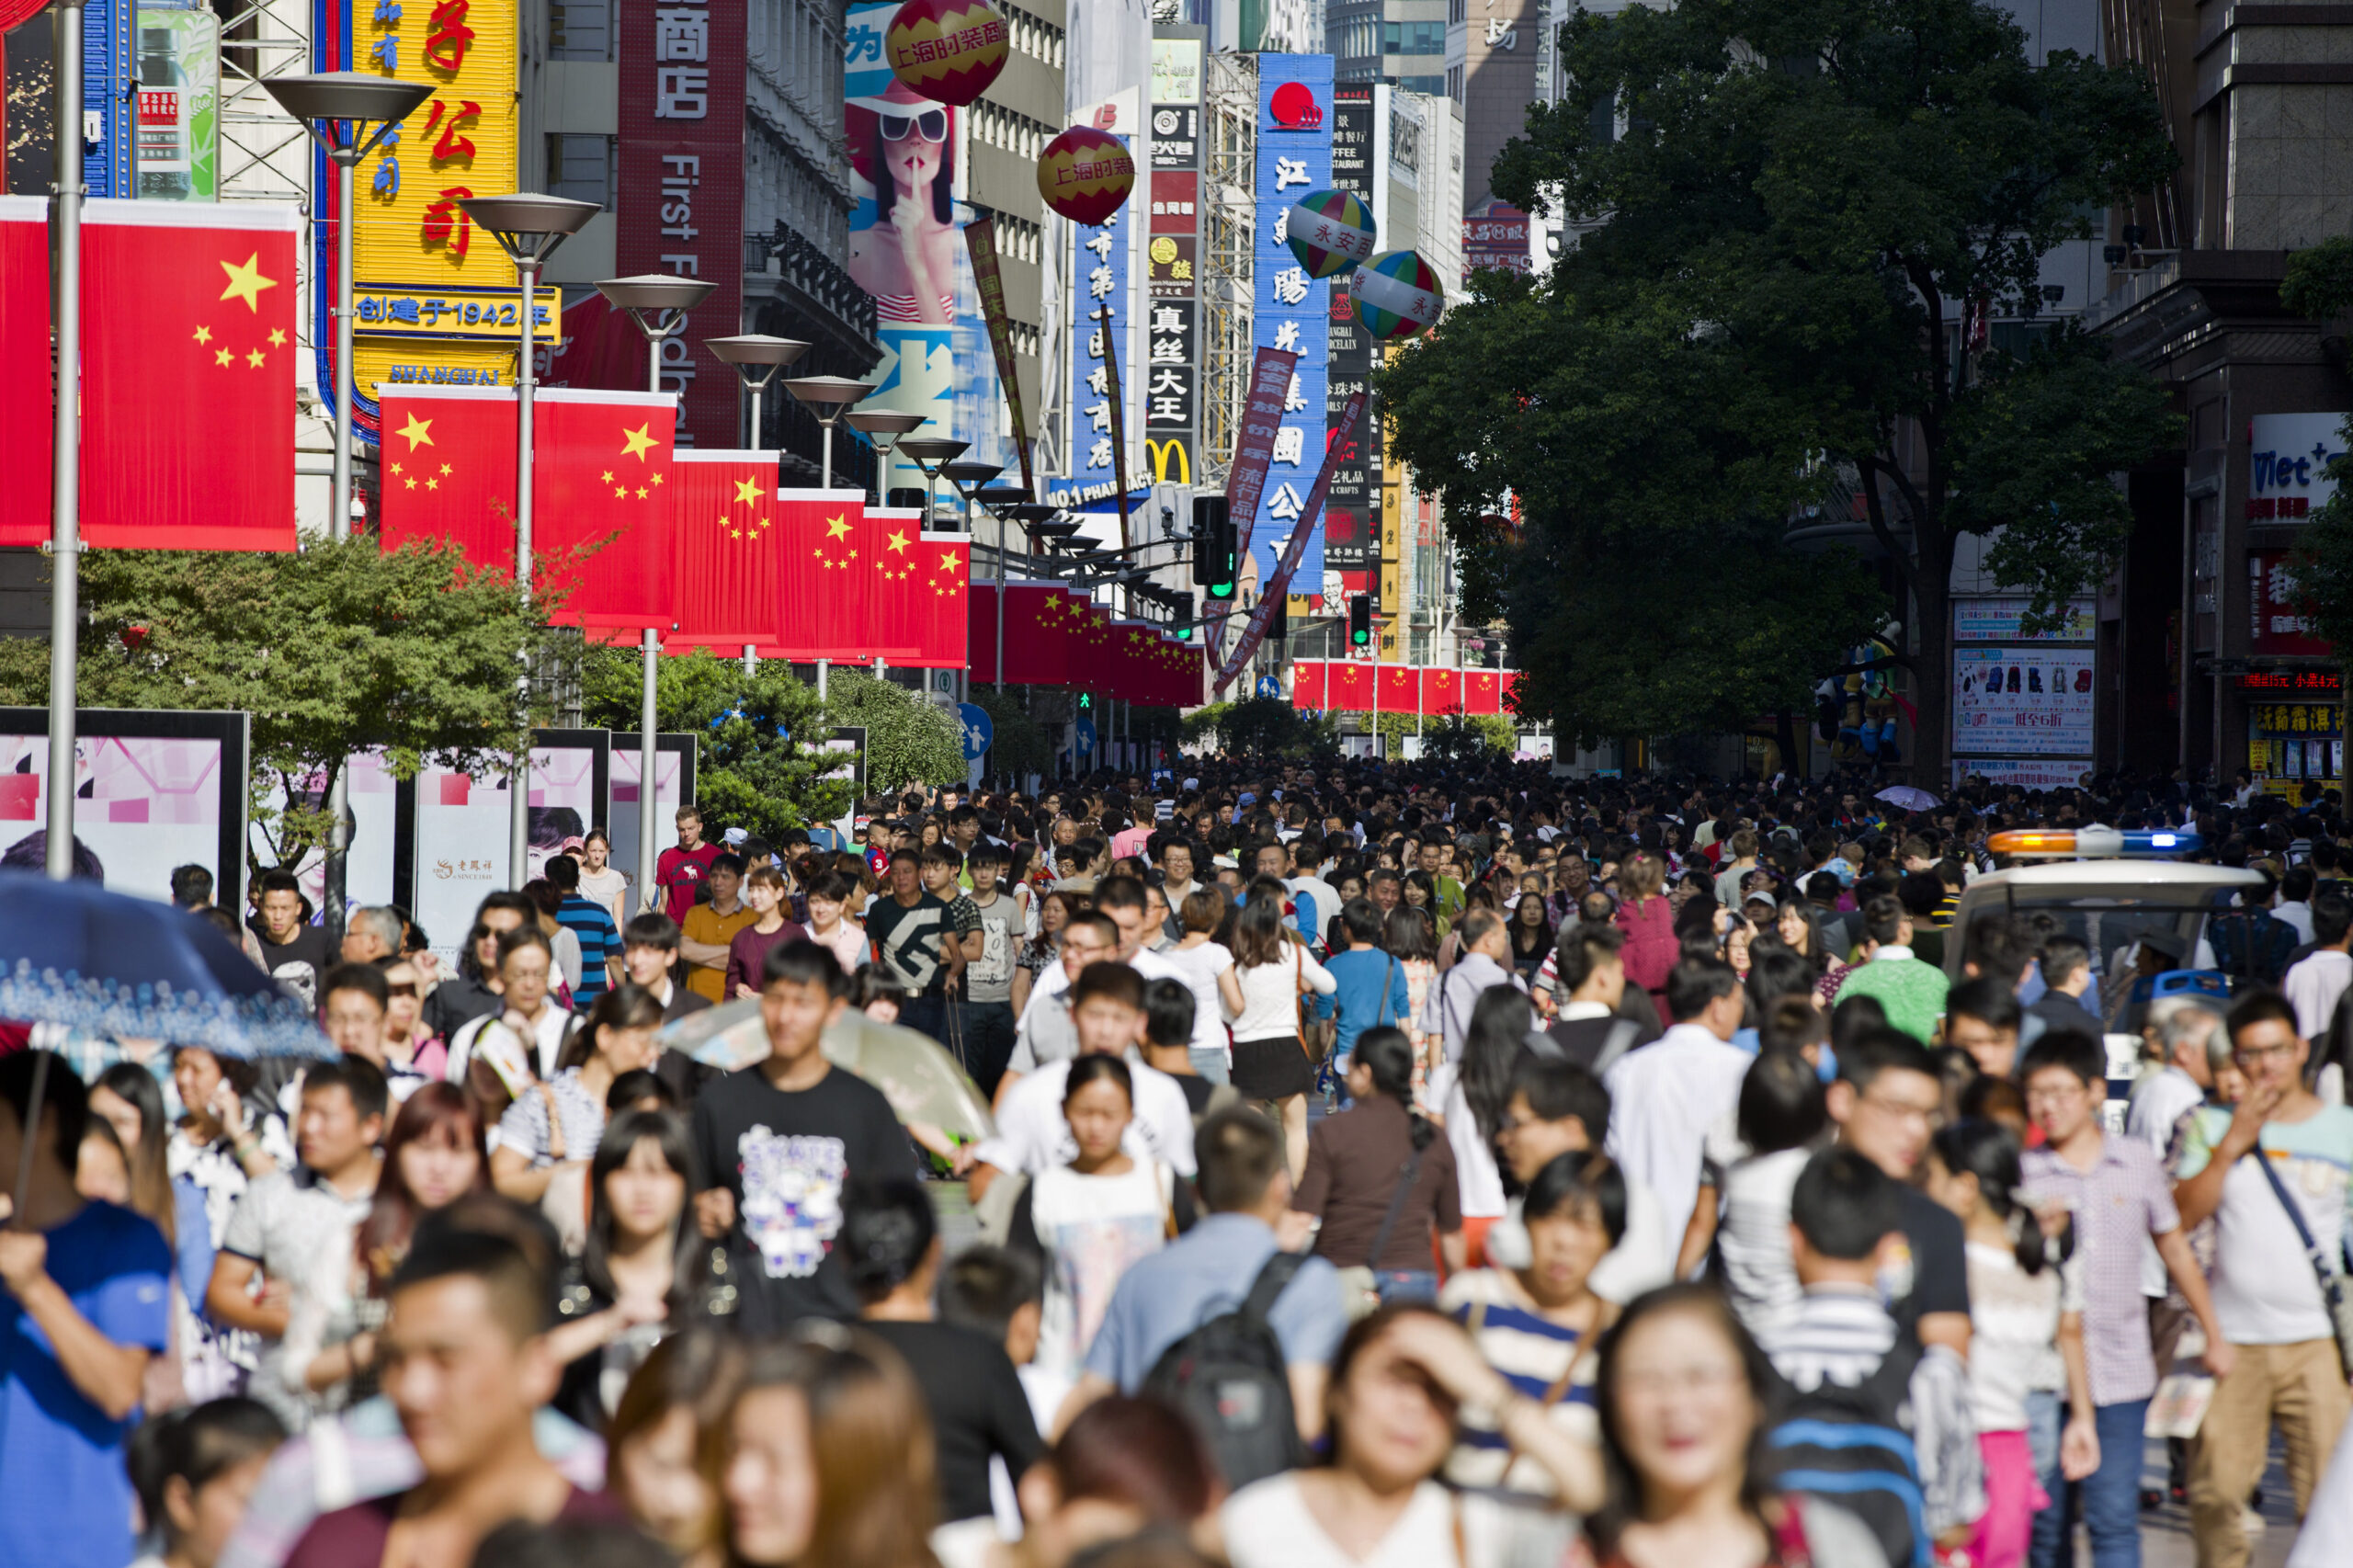 Nanjing Pedestrian Road, a main shopping area, packed with people on a national holiday in Shanghai in 2014